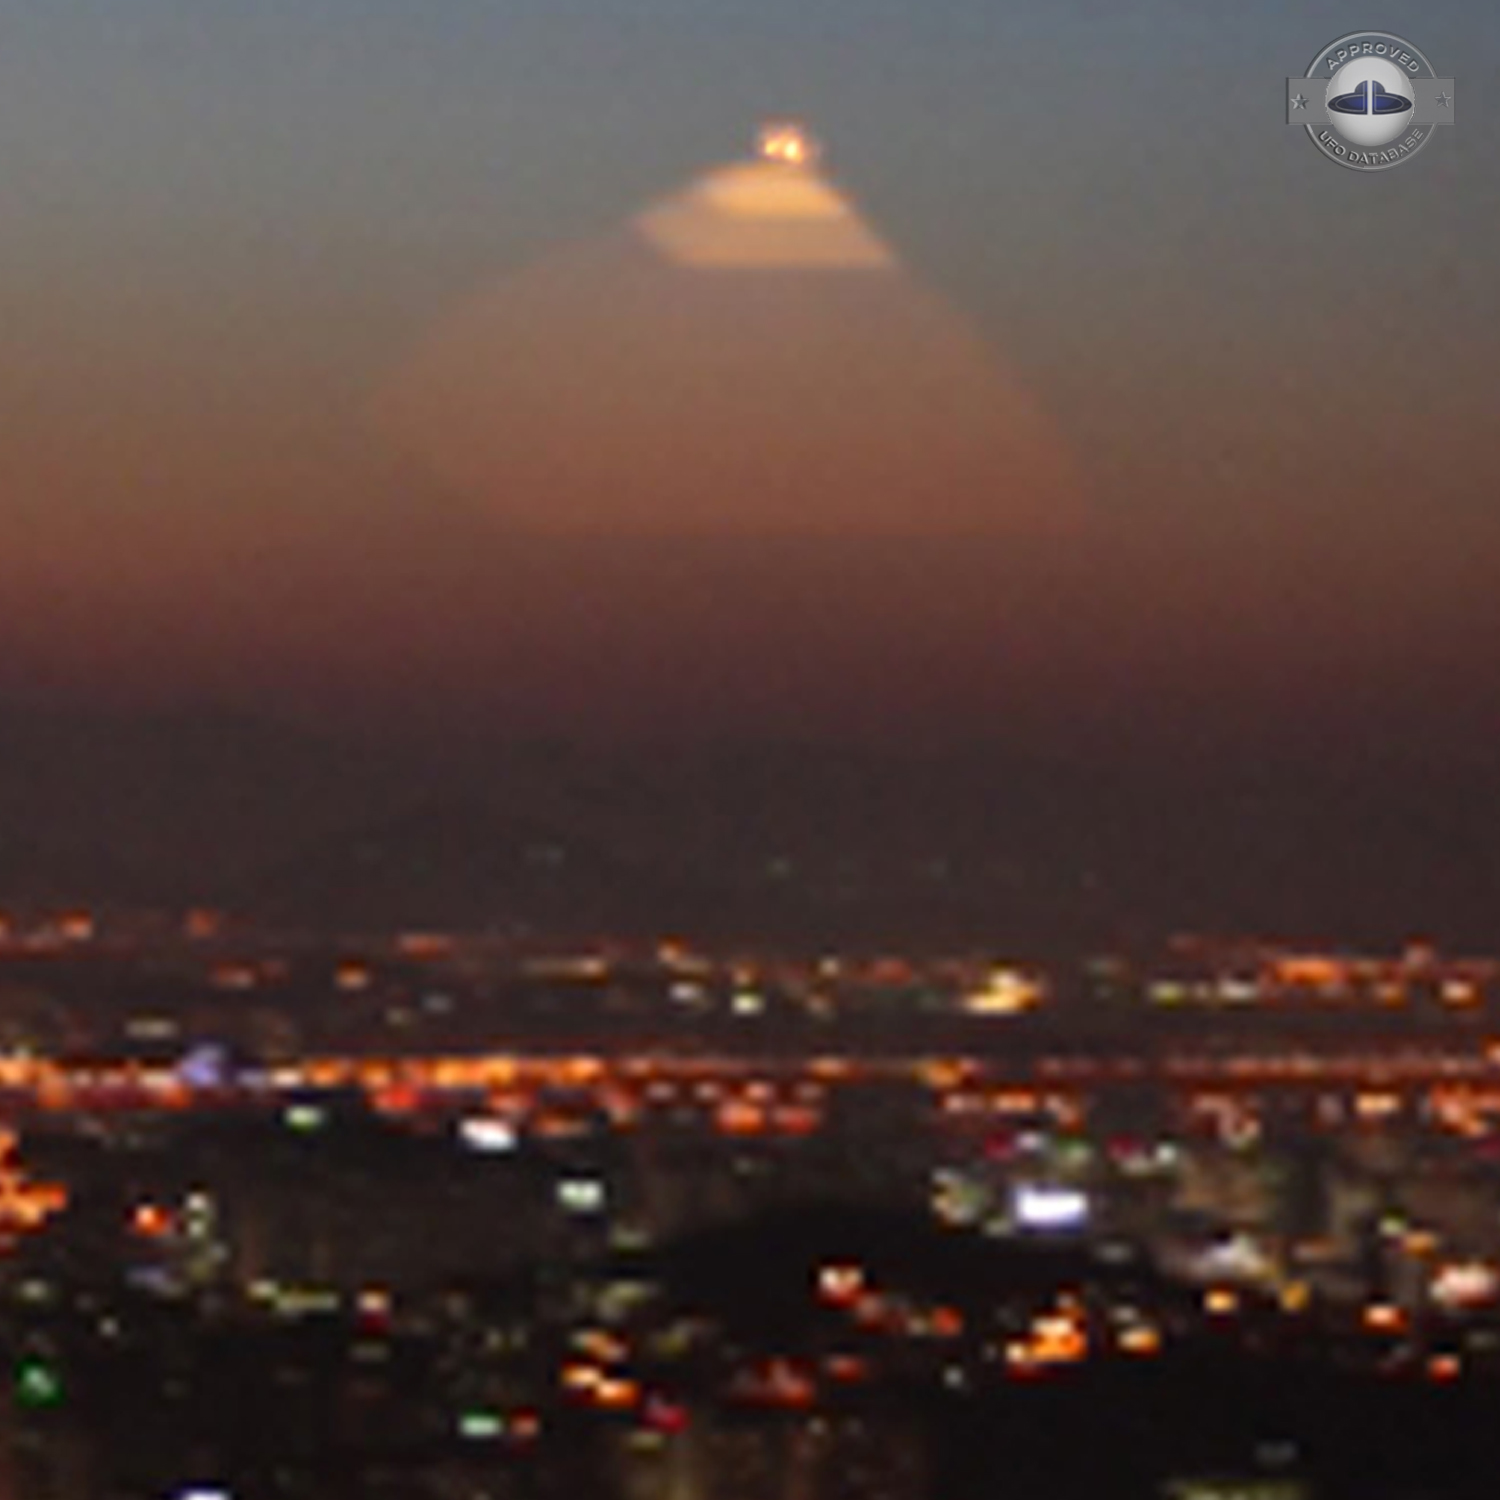 UFO Picture taken from N Seoul Tower | Namsan mountain, South Korea UFO Picture #172-4